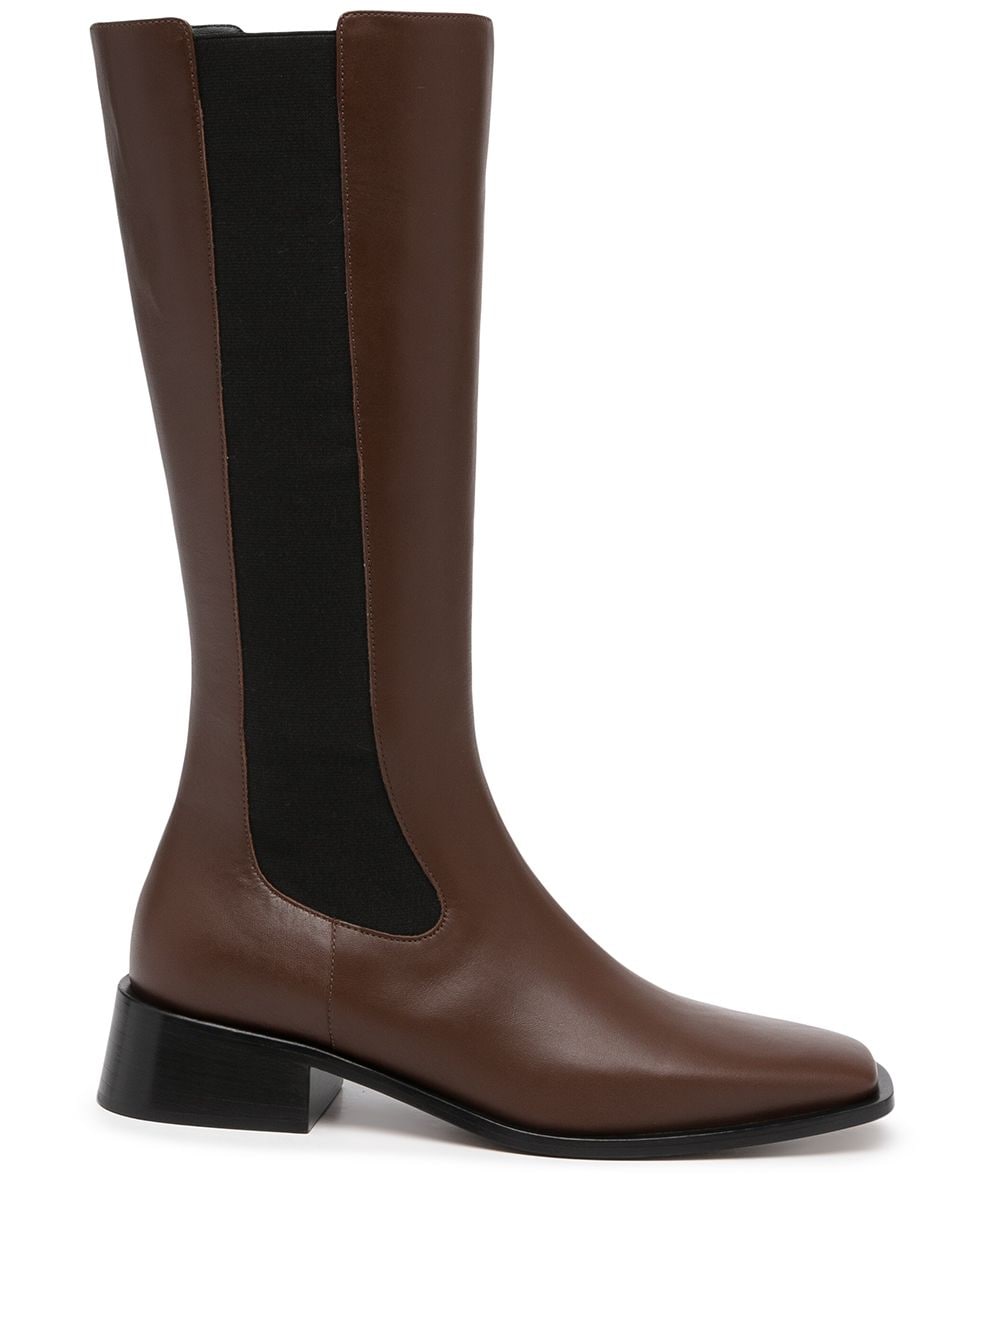 NEOUS elasticated side-panel boots - Brown von NEOUS